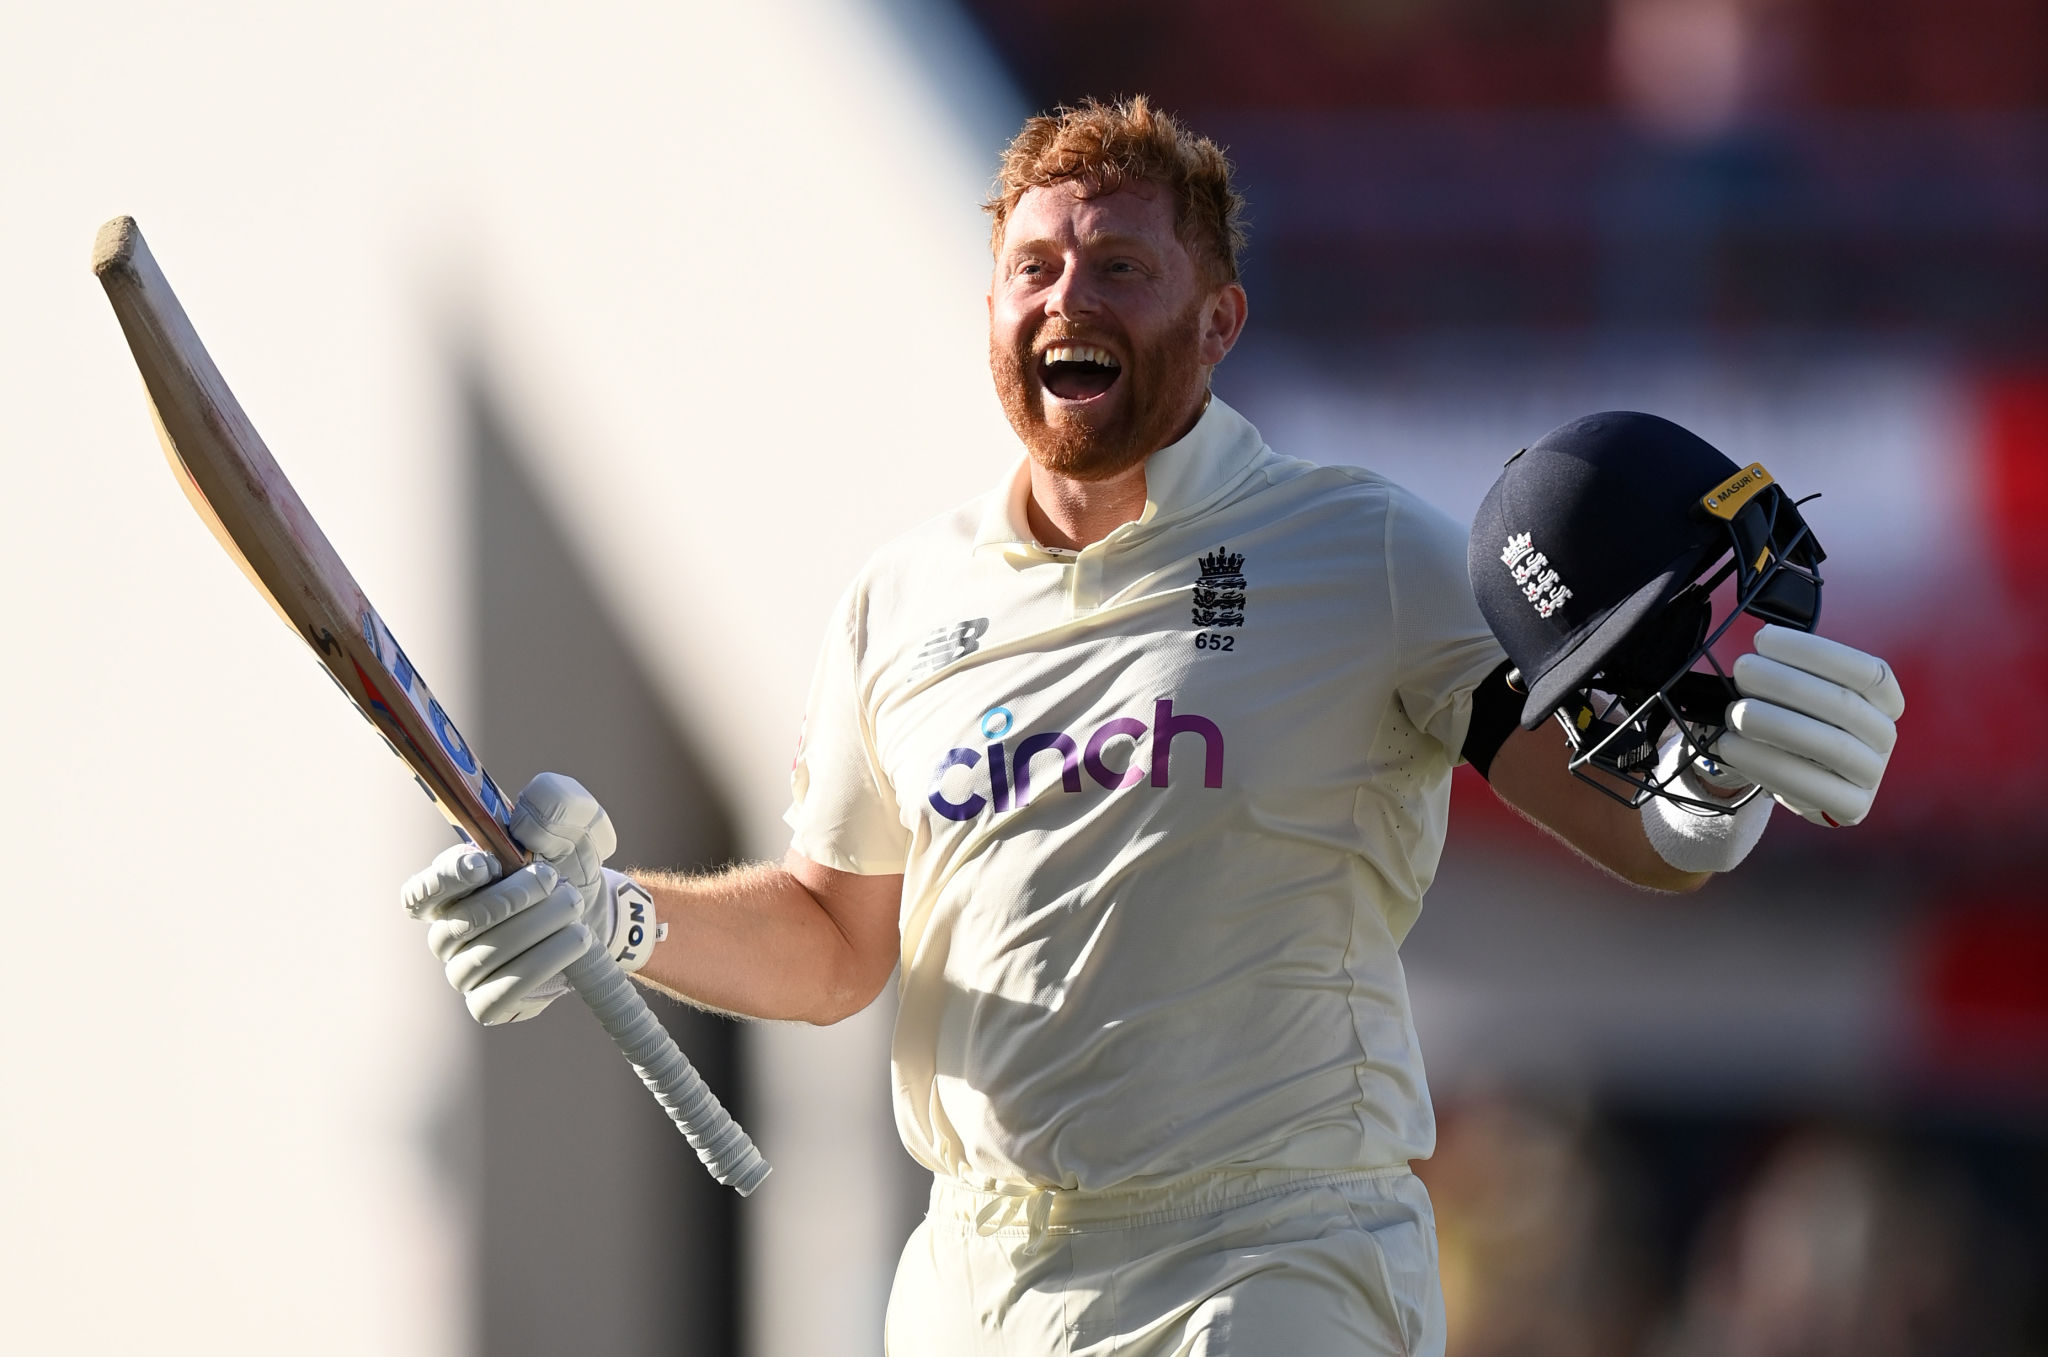 ENG beat NZ Highlights: Ben Stokes hail Jonny Bairstow, says ‘he gave us win that is bigger than World Cup Final & Headingley test'